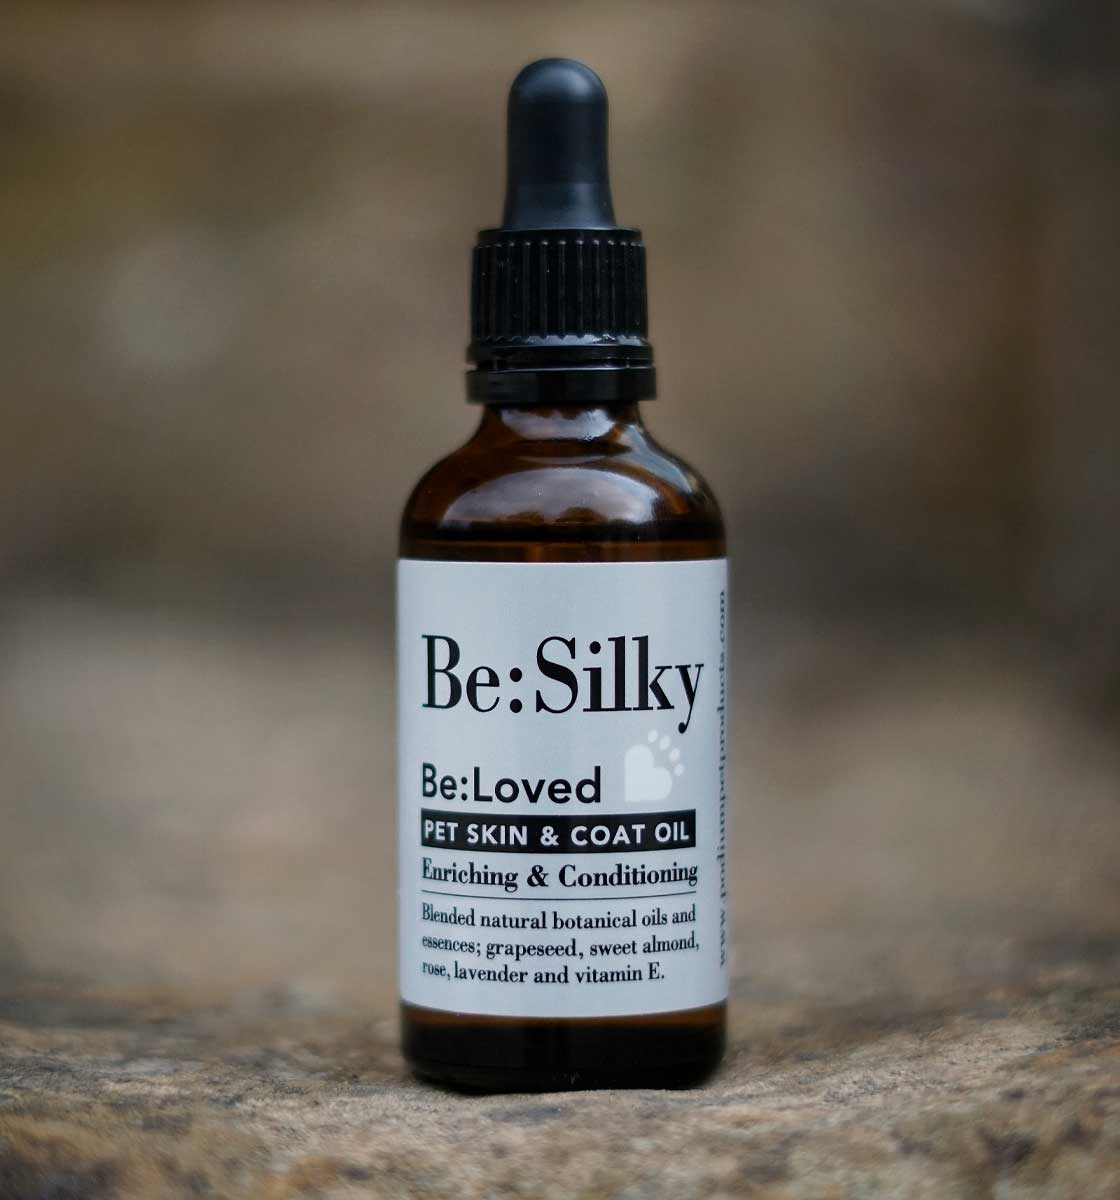 Be:silky pet skin and coat oil product.